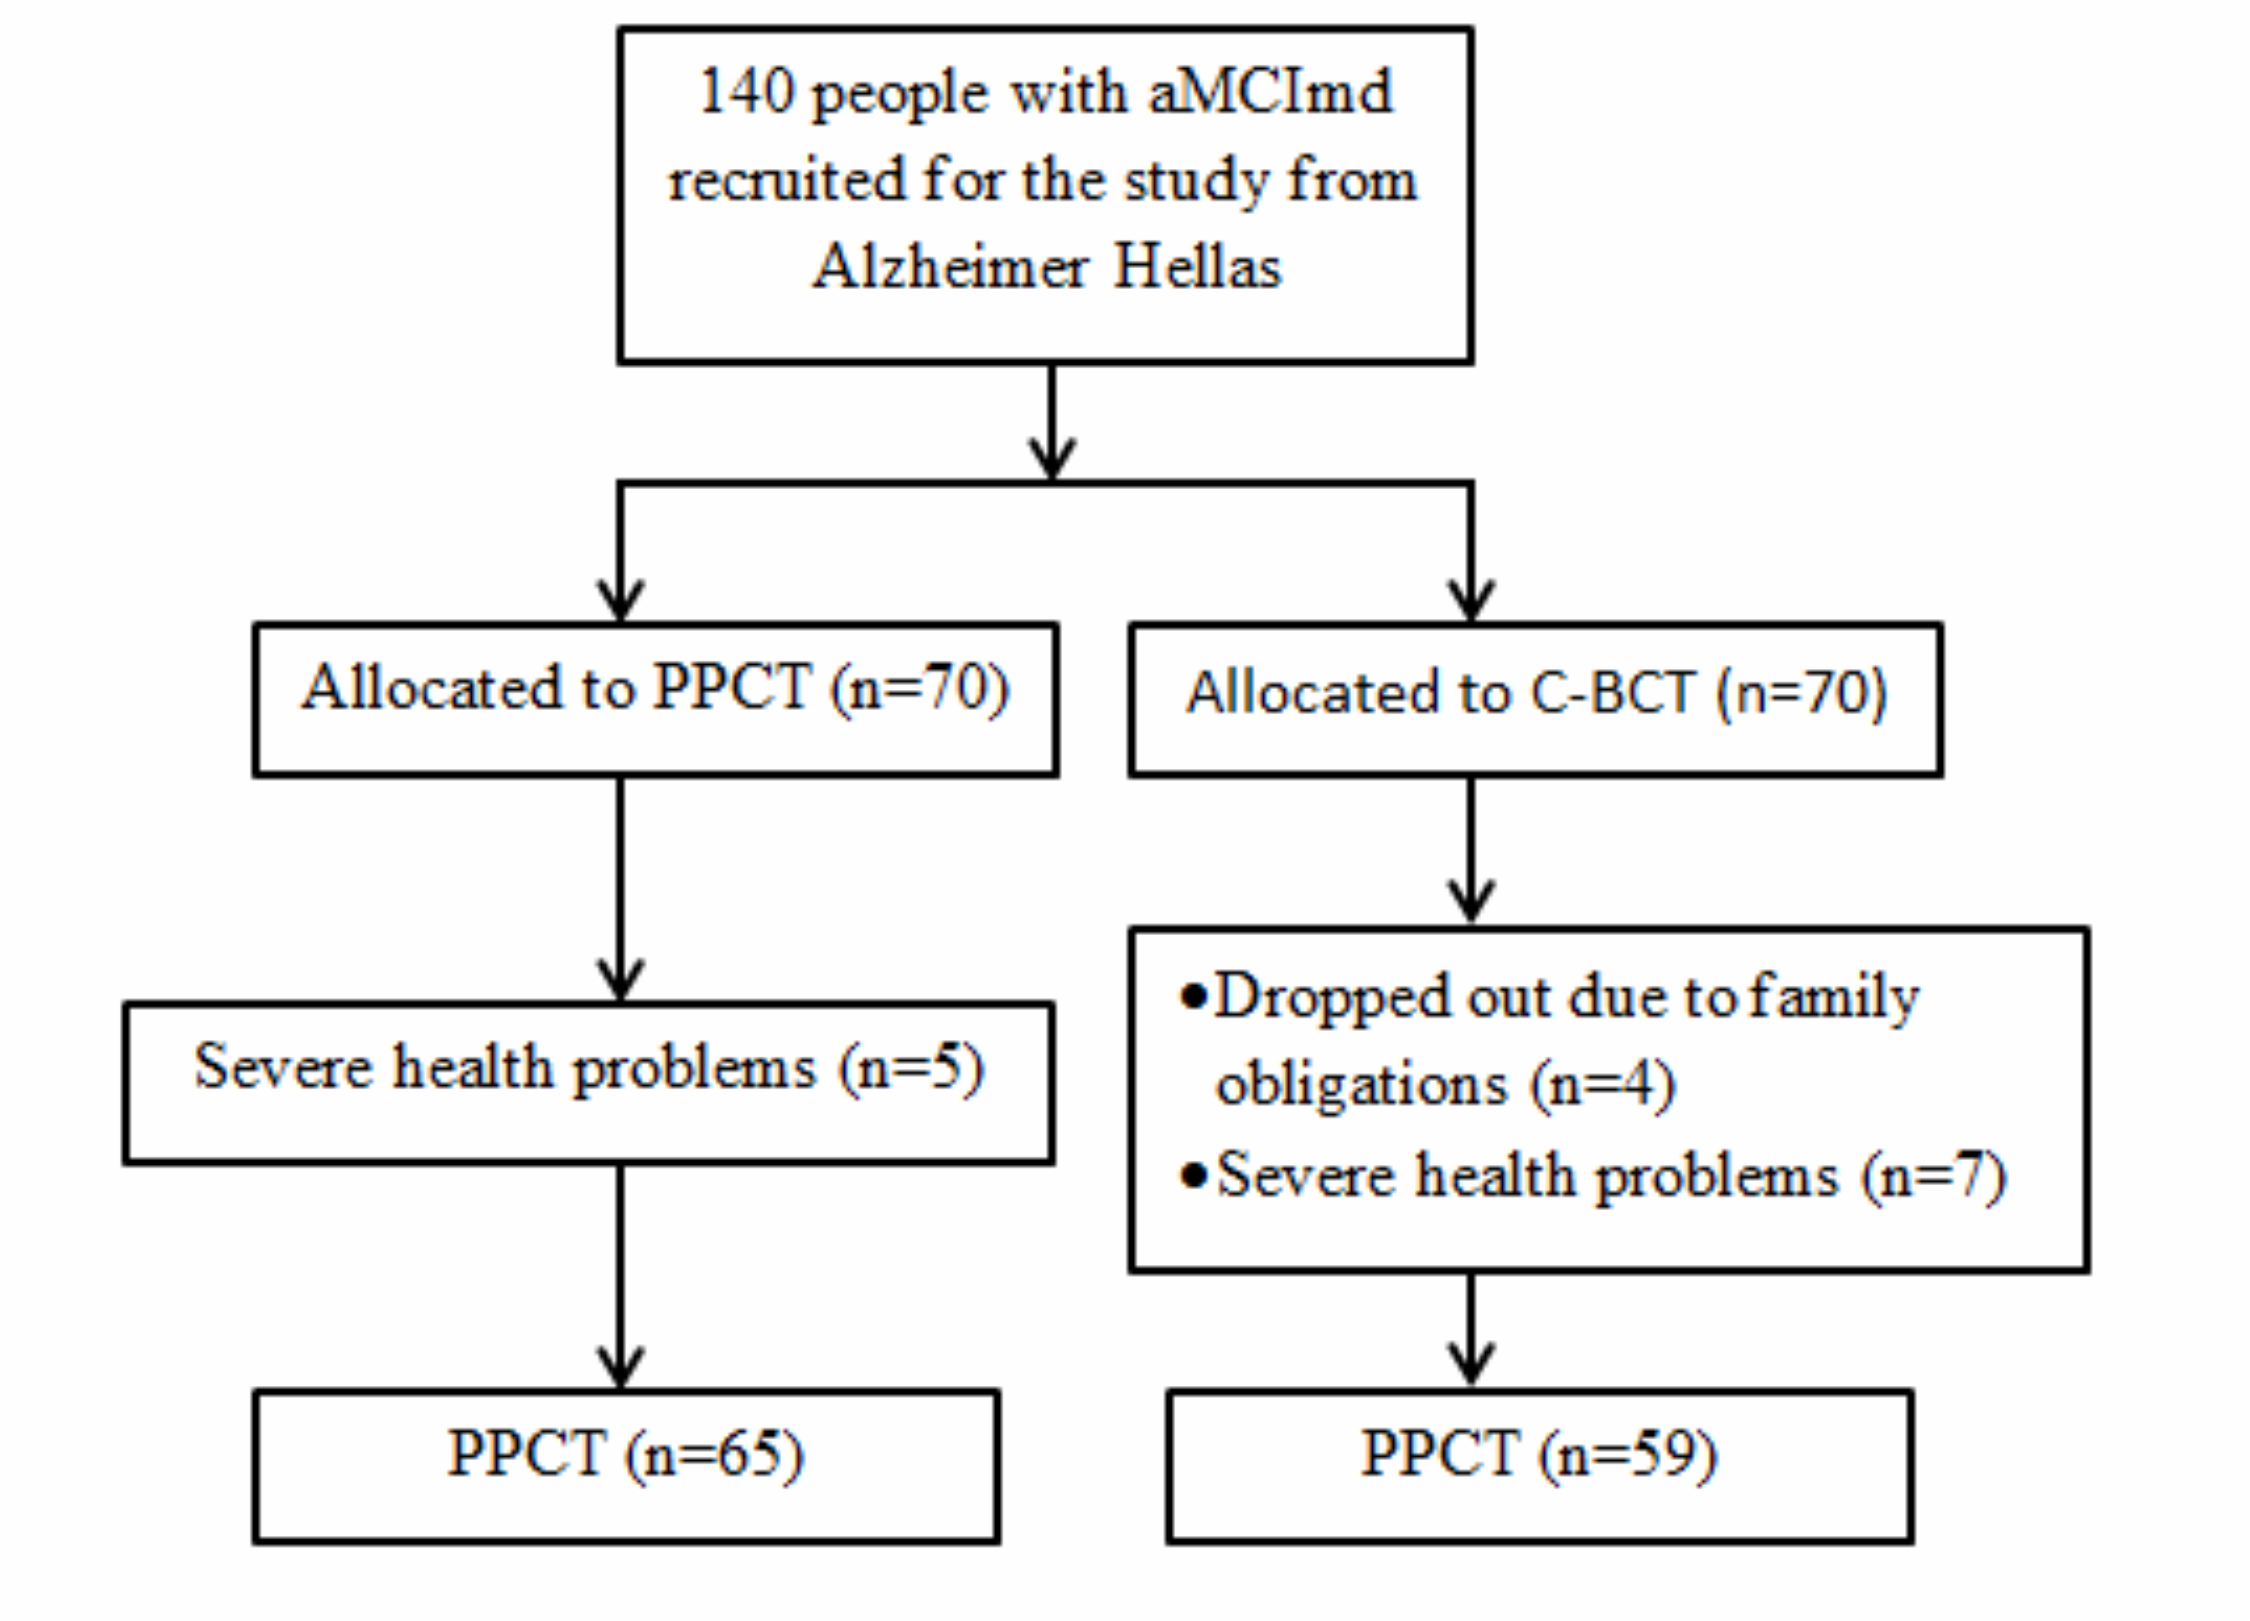 Figure 1 Flow chart of the study. Abbreviations: aMCImd: amnestic and Multiple Domains MCI; C-BCT: Computer-Based Cognitive Training; PPCT: Paper and Pencil Cognitive Training